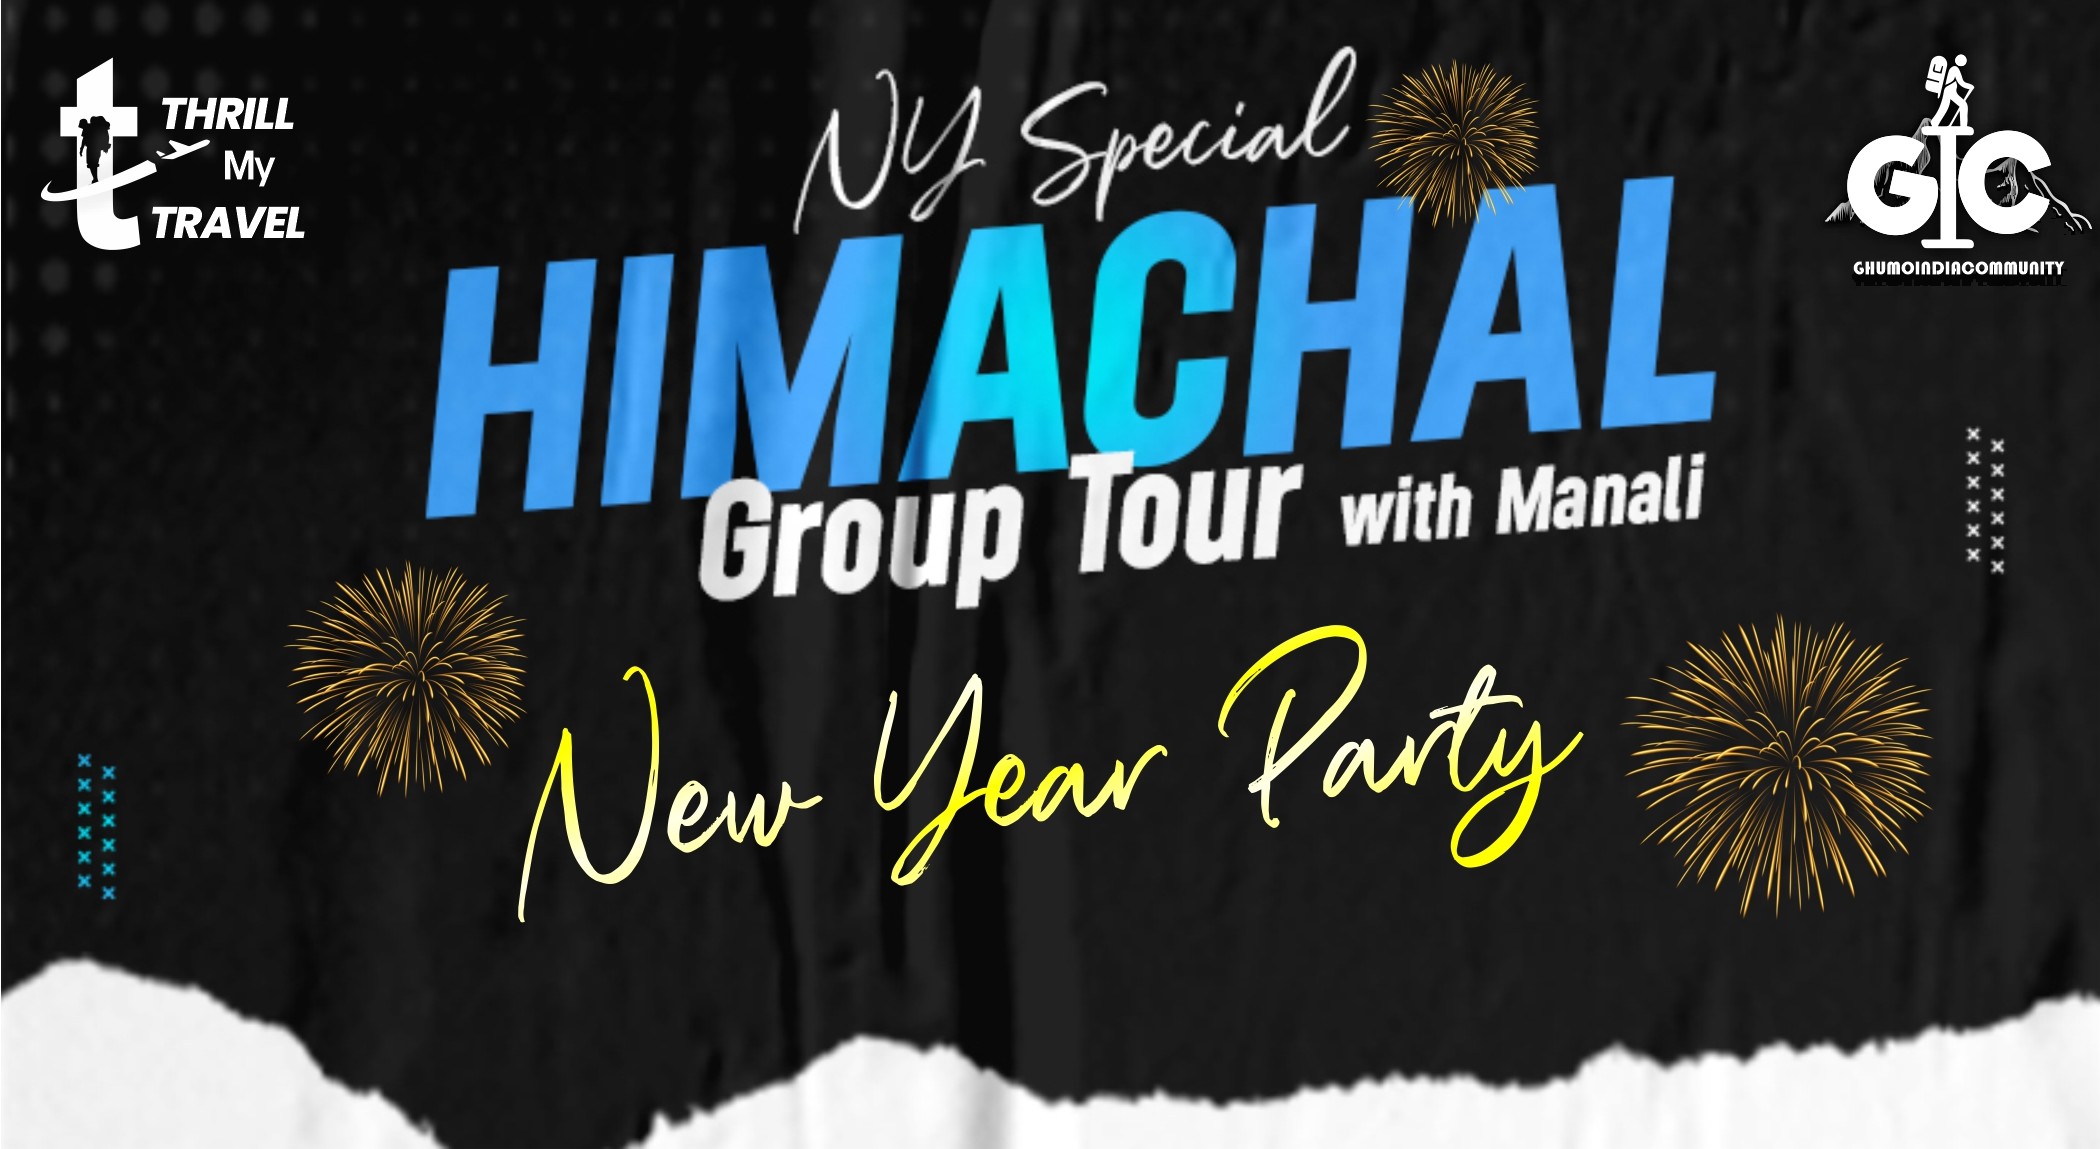 New Year Party Himachal Group Tour Package From Indore Backpackers